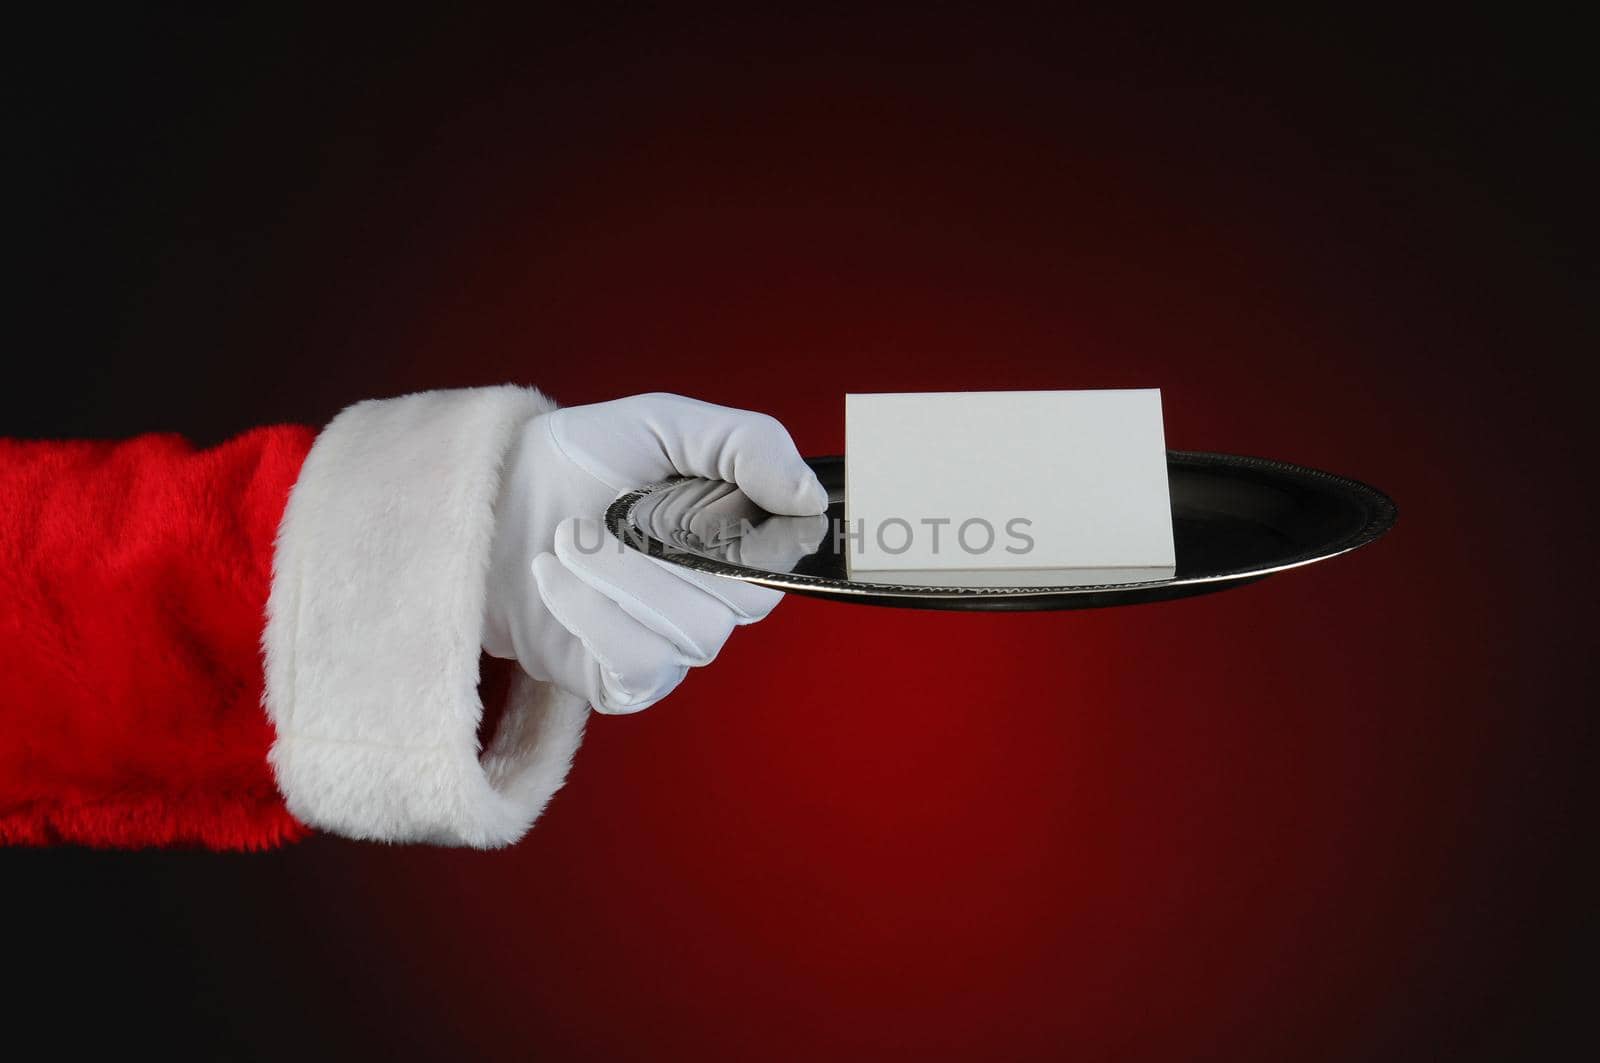 Santa Claus holding a silver serving tray with a blank card. Horizontal format over a light to dark red background.